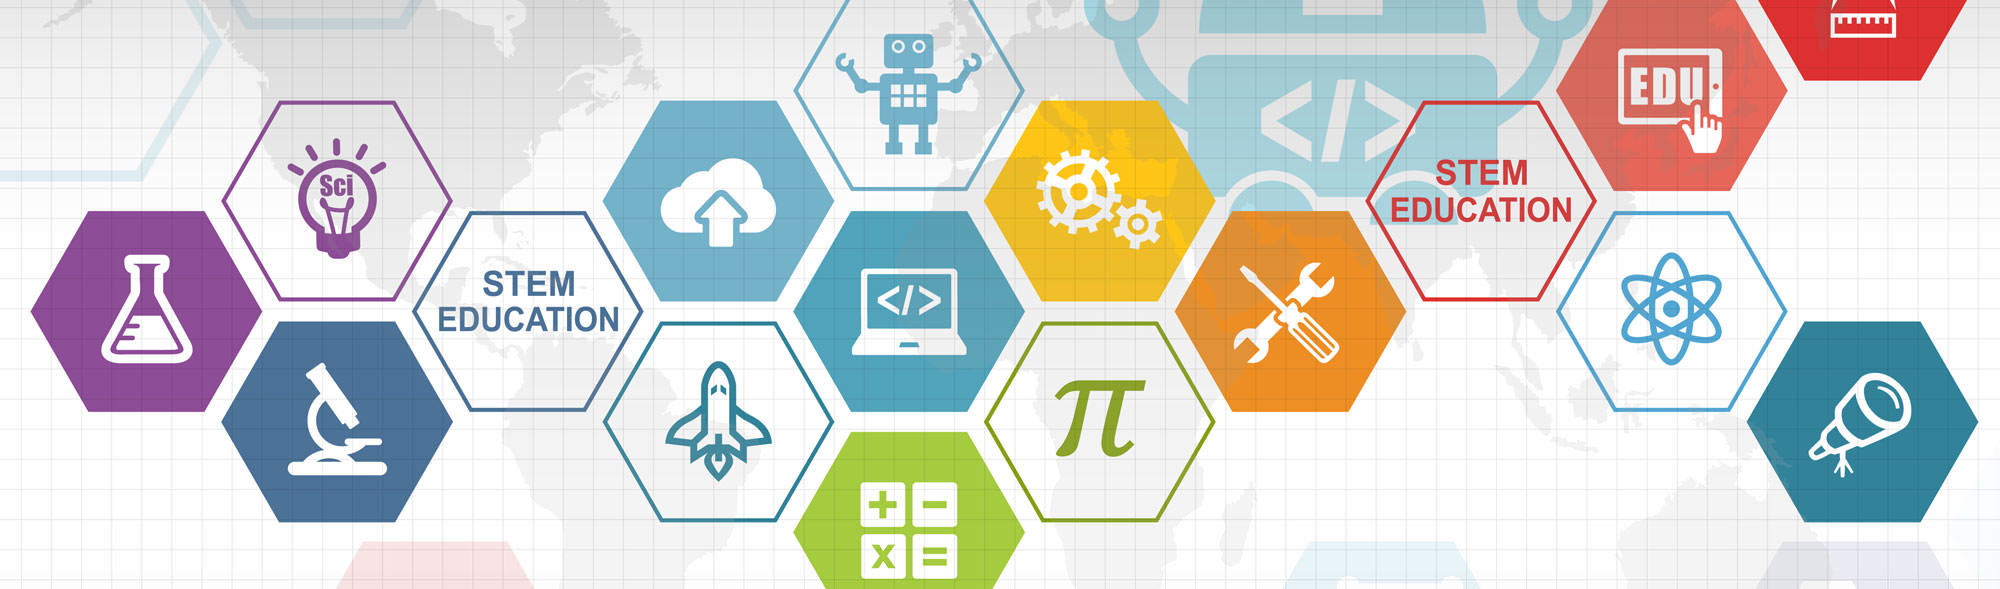 Icons and graphics related to STEM subjects